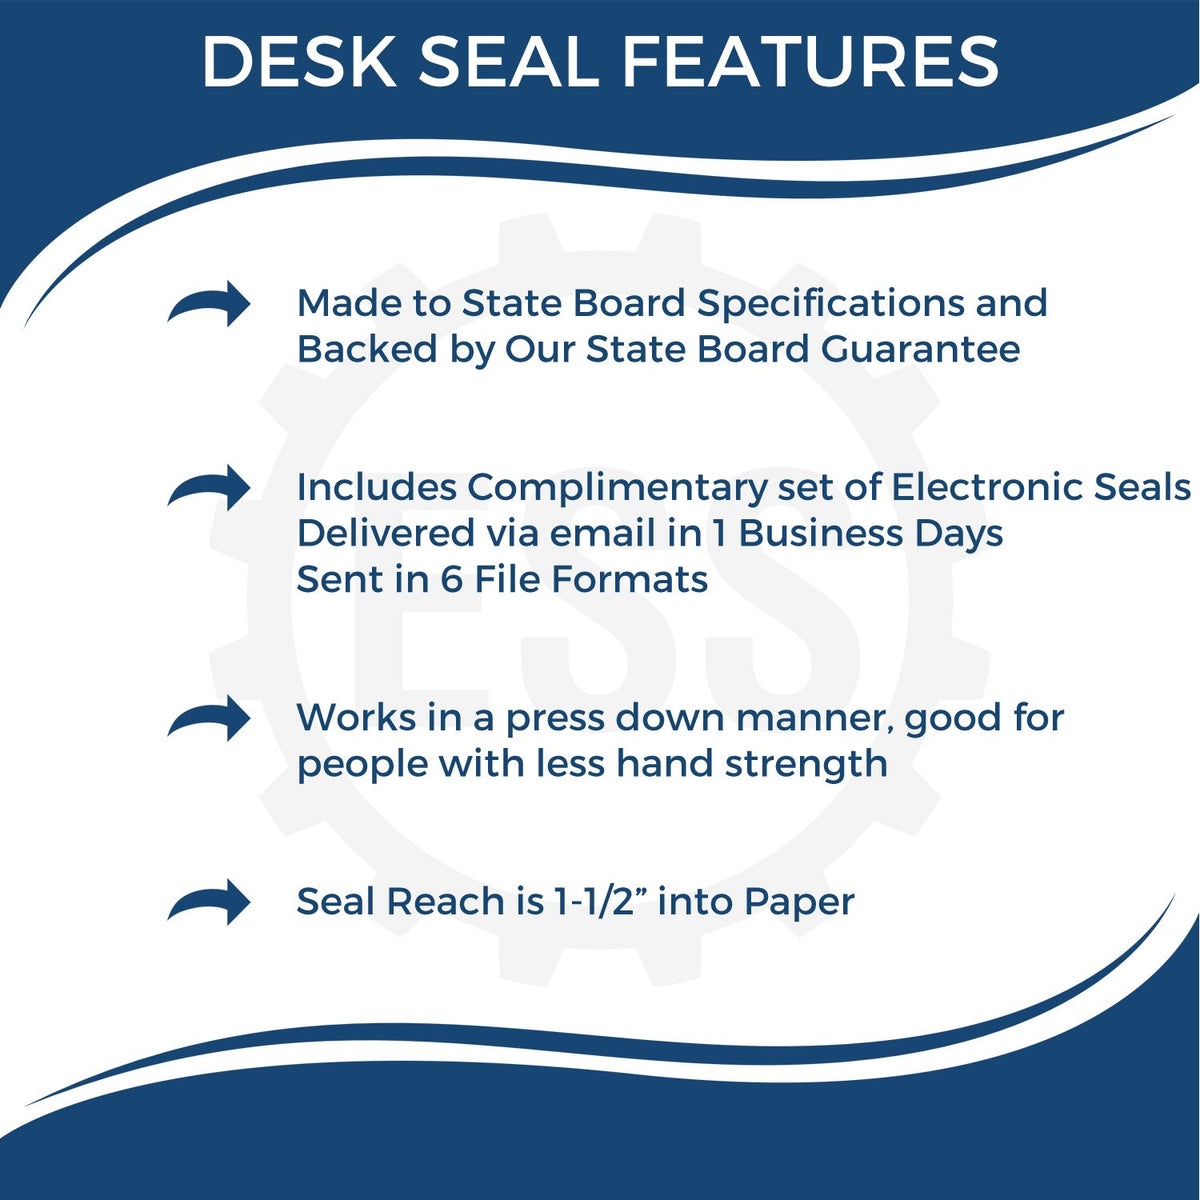 A picture of an infographic highlighting the selling points for the Minnesota Desk Architect Embossing Seal